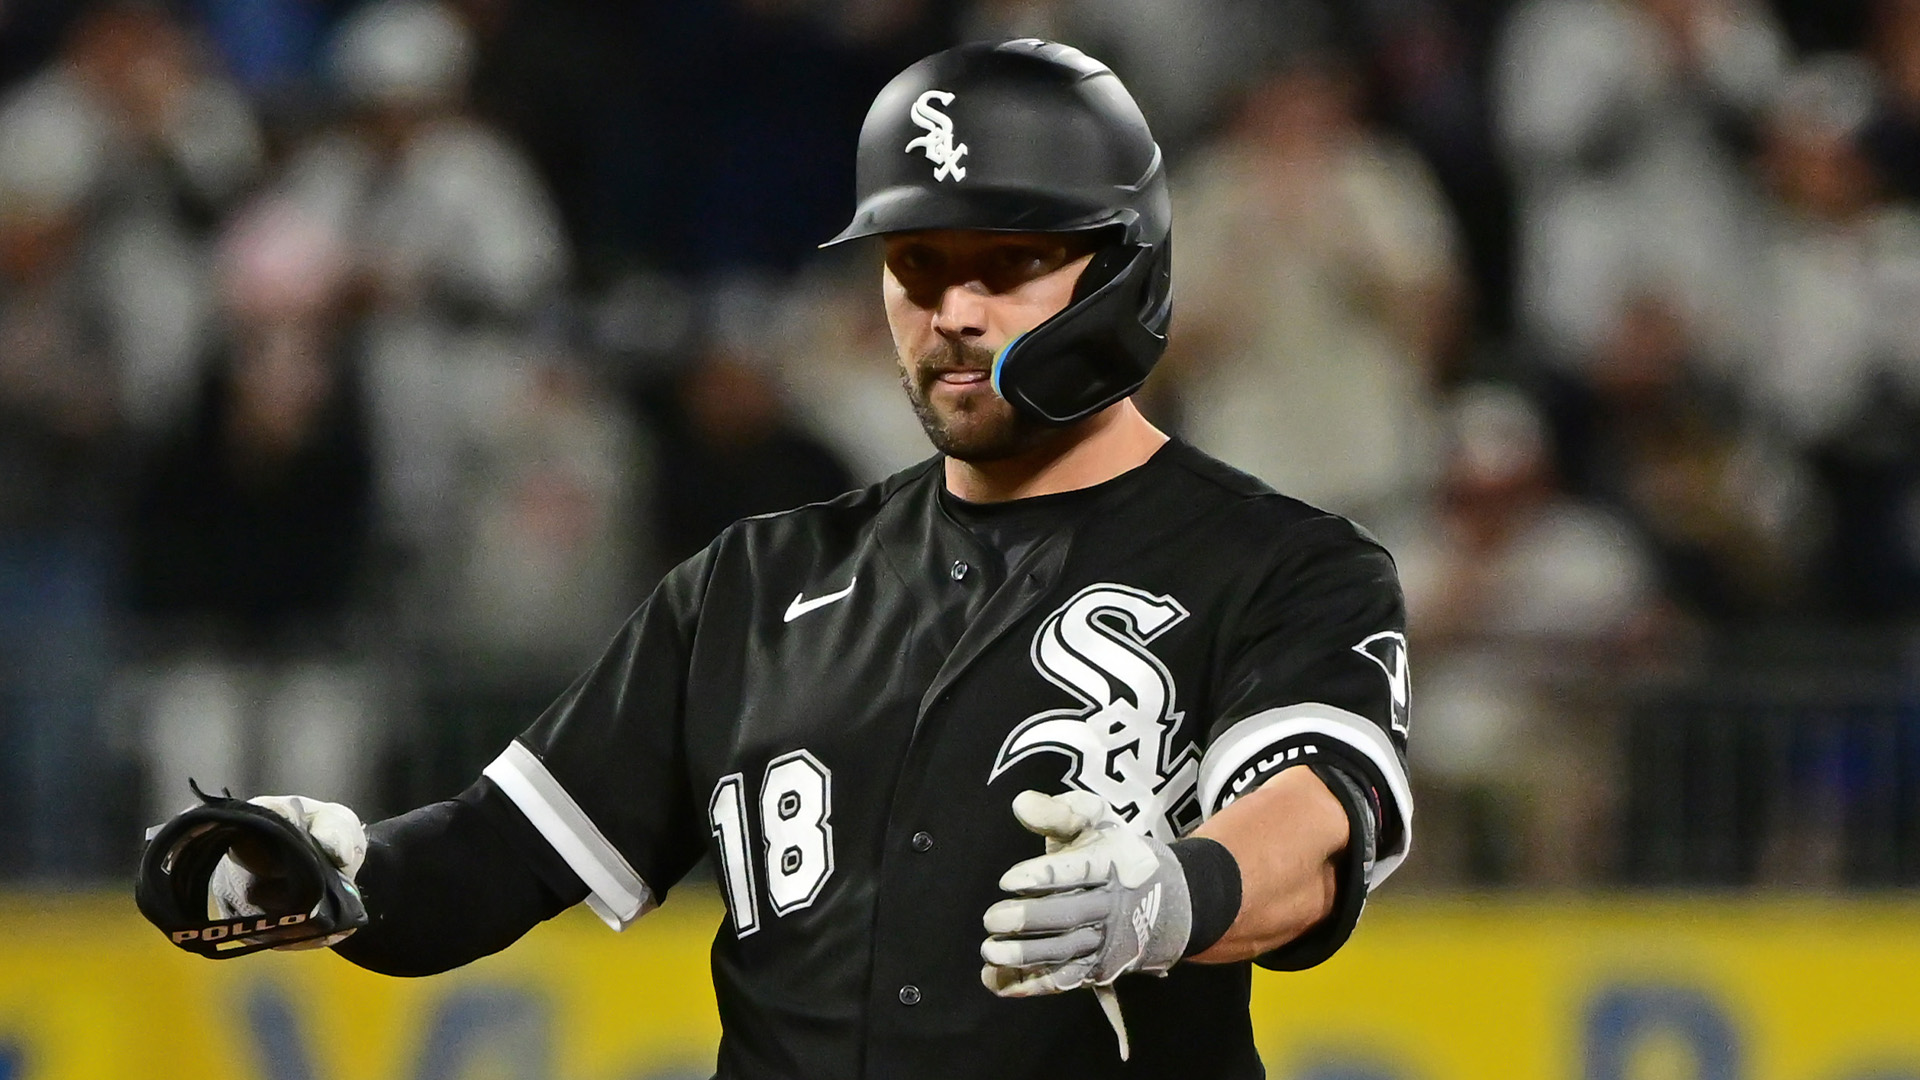 Watch: Pinch hitter AJ Pollock has go-ahead double for White Sox